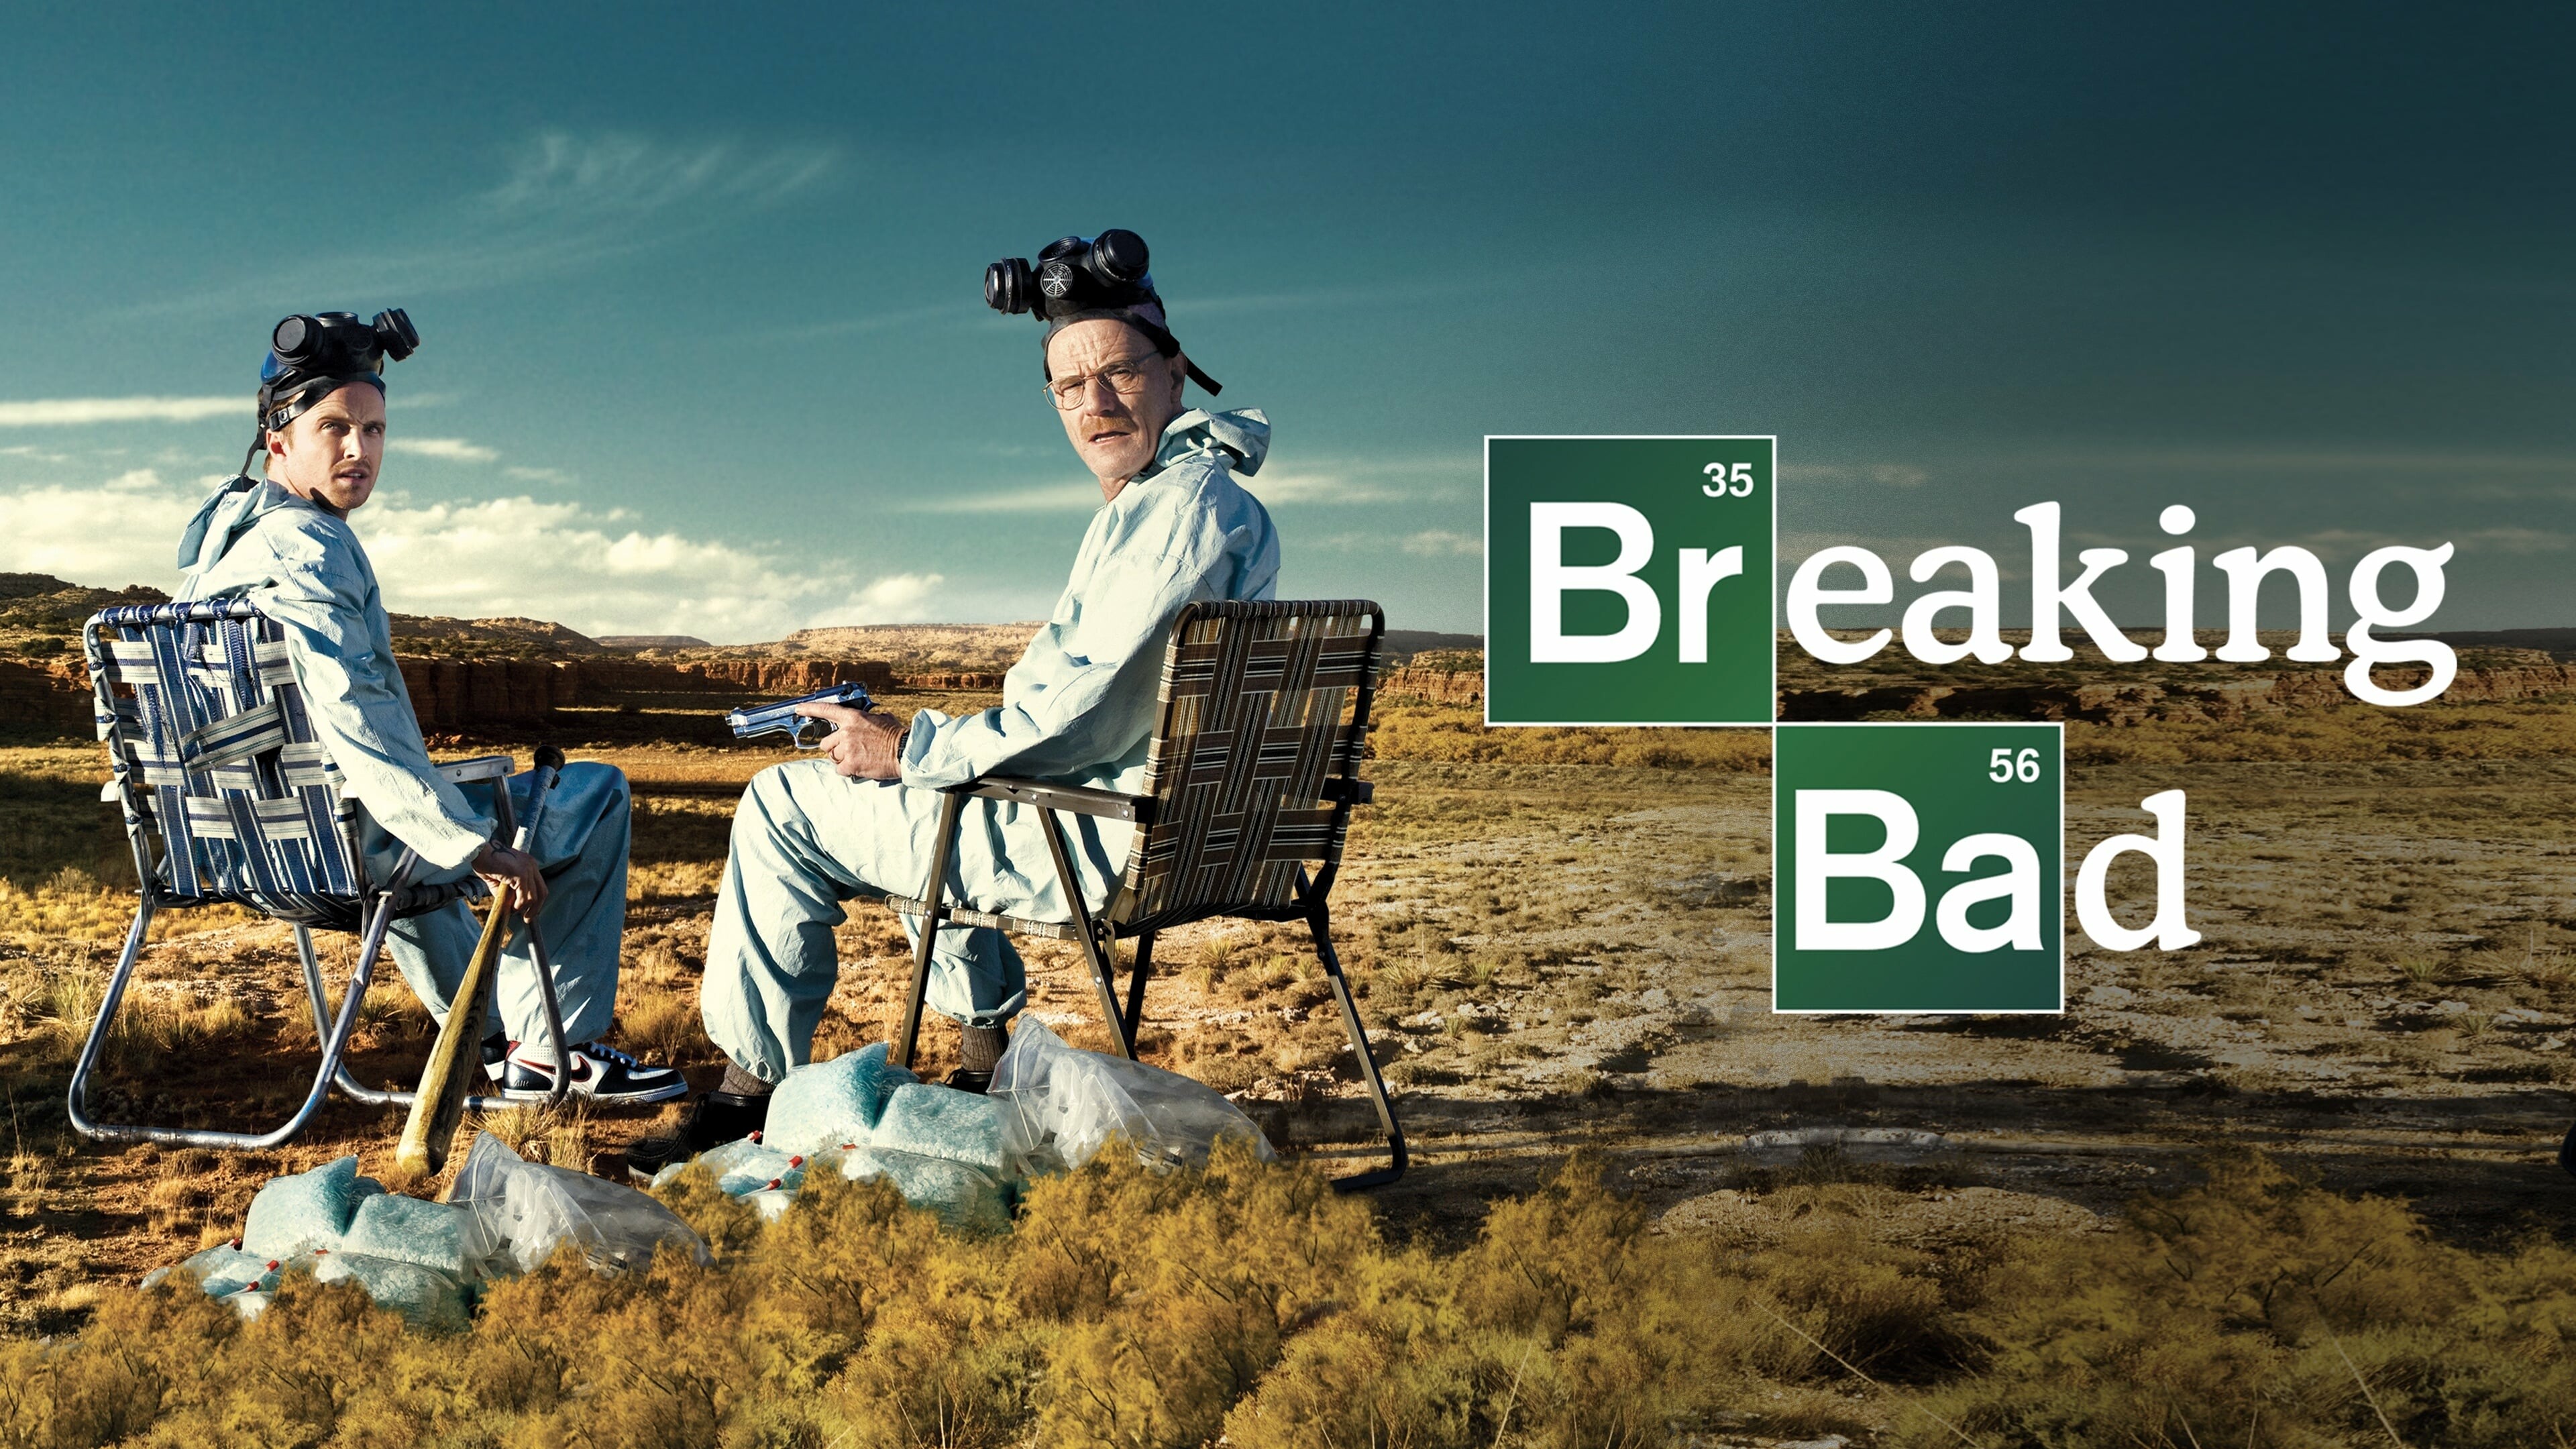 Breaking Bad: A protagonist Walter White, Bryan Cranston, A chemistry teacher who lives in New Mexico. 3840x2160 4K Wallpaper.